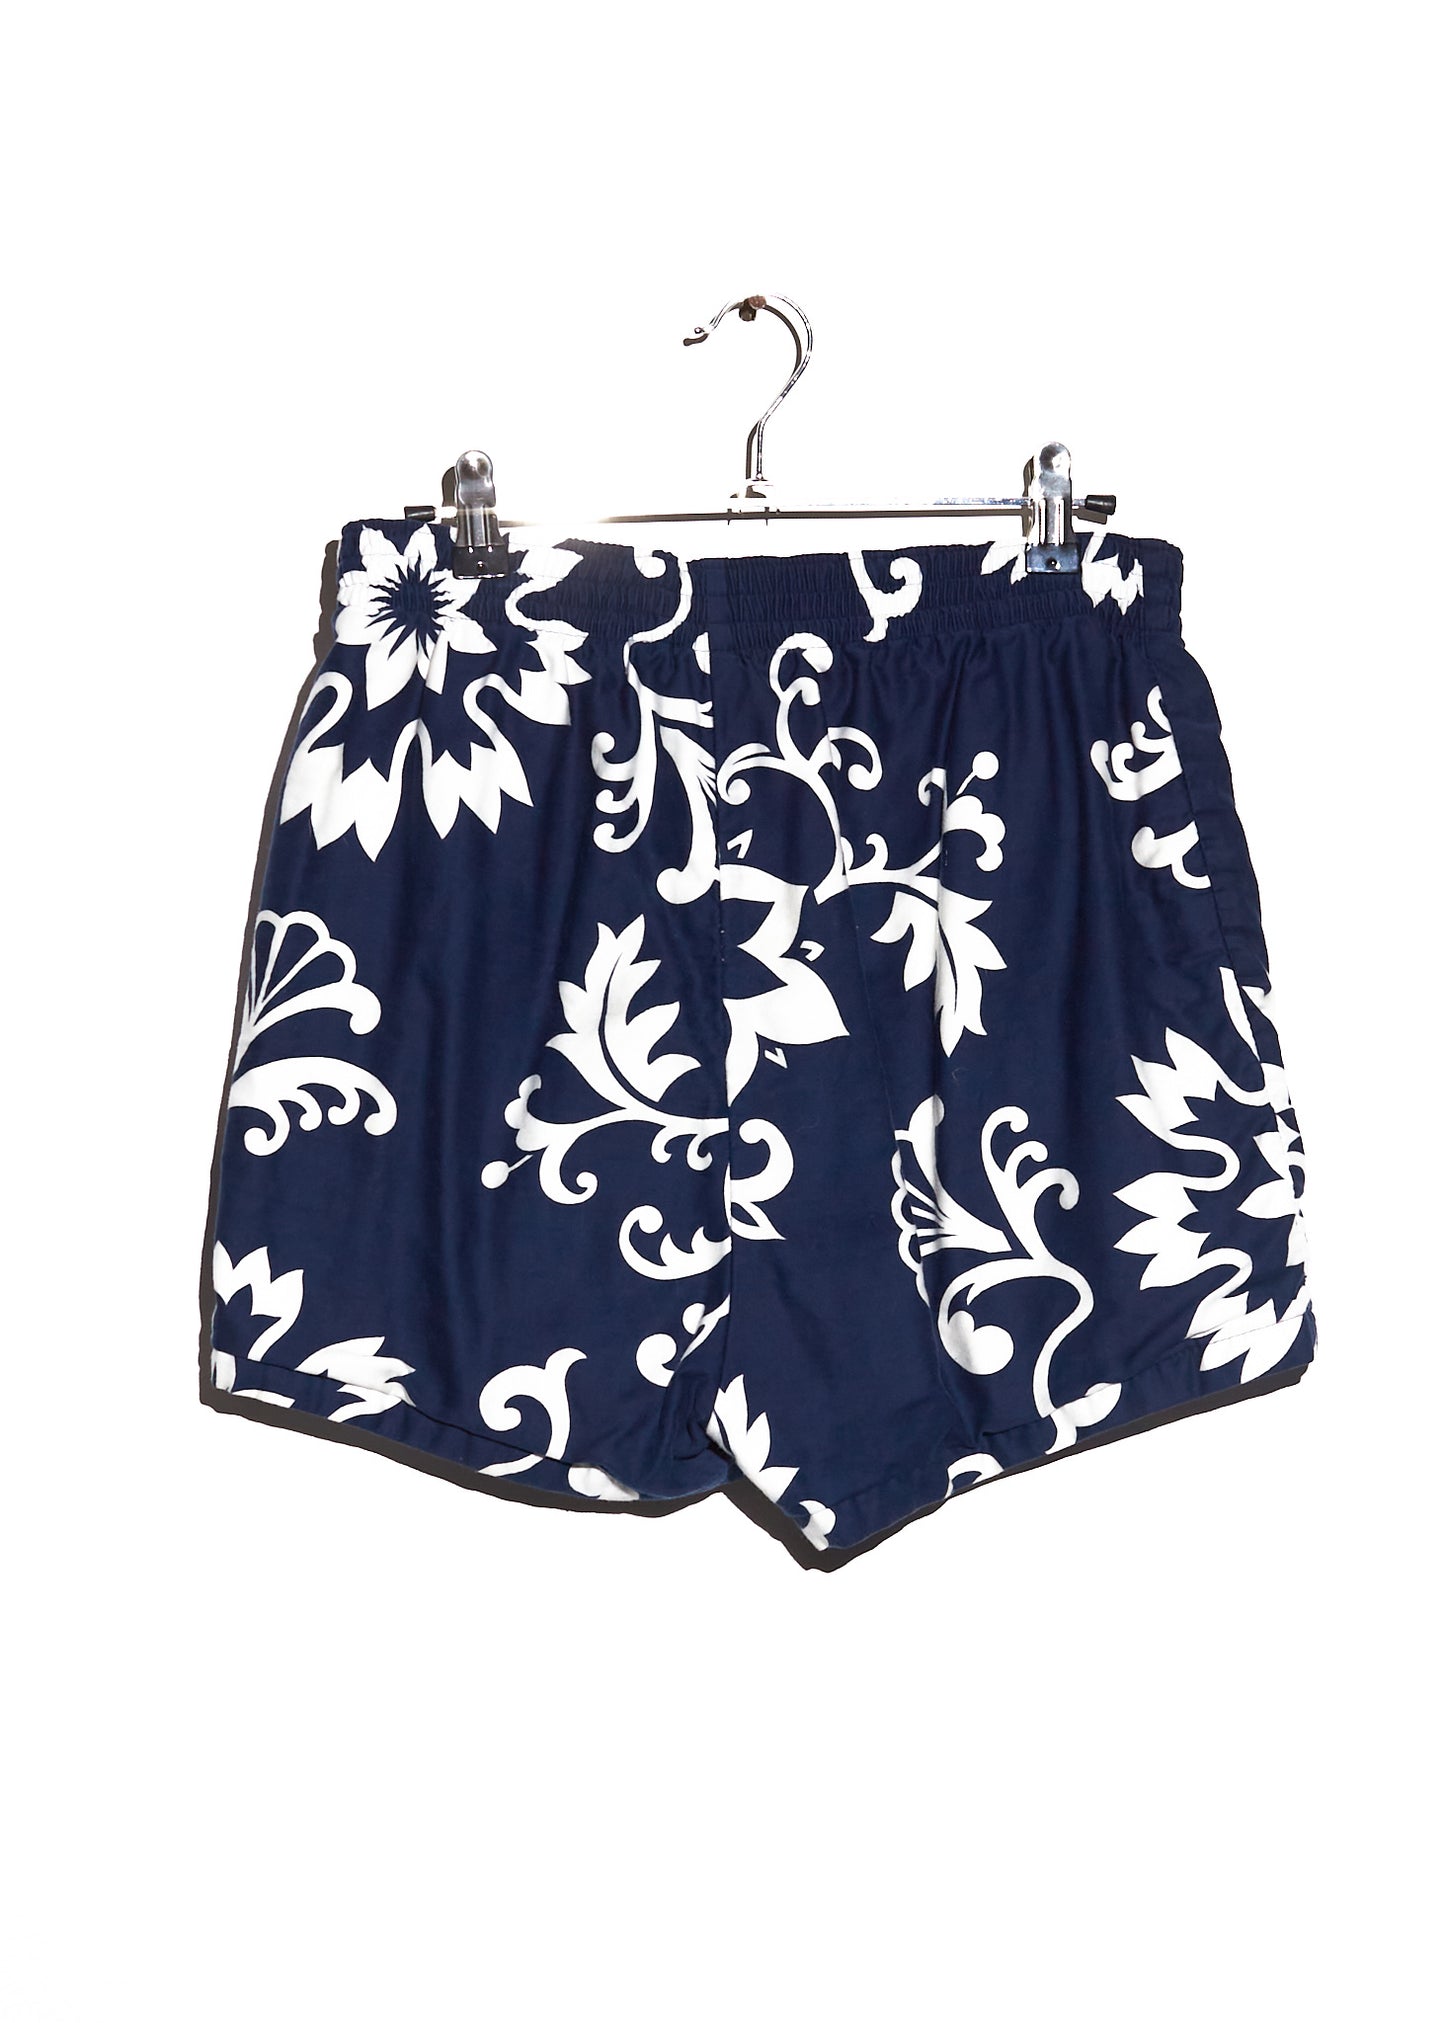 Navy Blue White Floral Shorts